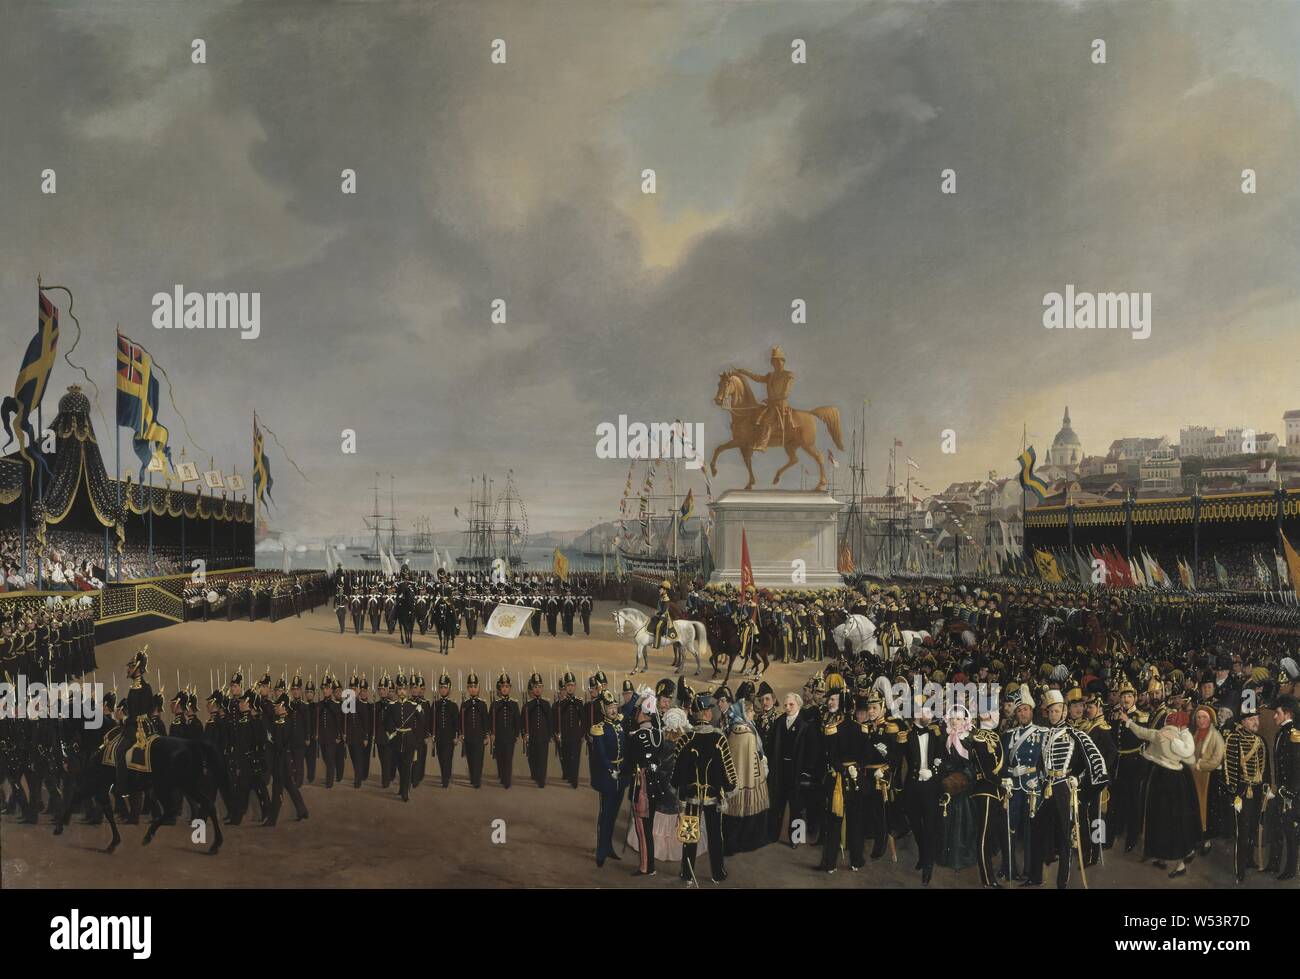 Carl Stefan Bennet, The Unveiling of the Equestrian Statue of Carl XIV Johan or Sw, in 1854, The discovery of King Carl XIV Johan's equestrian statue 1854, painting, oil on canvas, Height, 125 cm (49.2 inches), Width, 186 cm (73.2 inches) Stock Photo